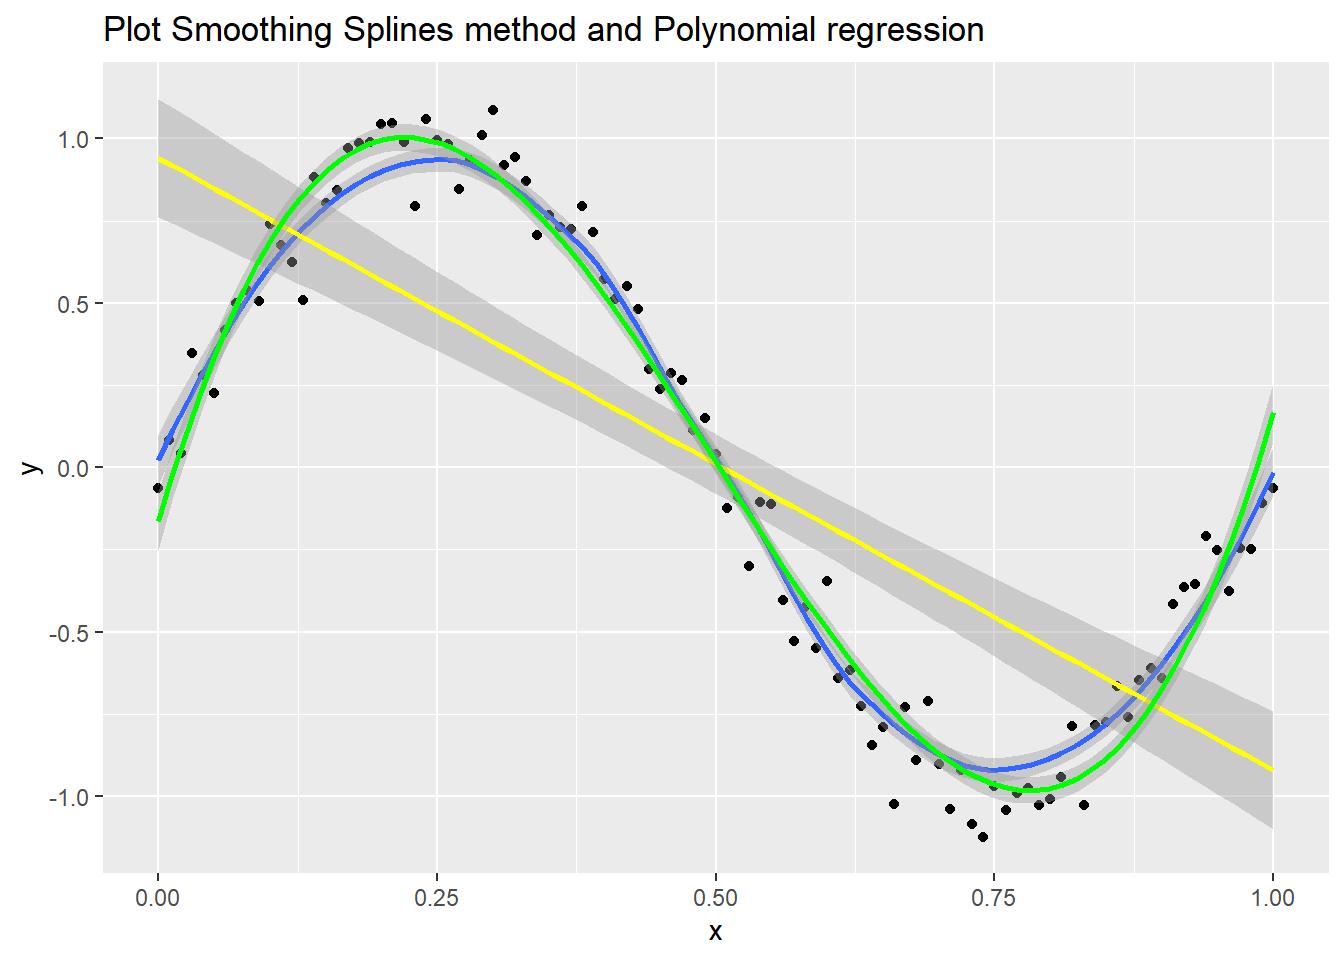 R ggplot2 plot of the lm and smoothing splines with geom_smooth().